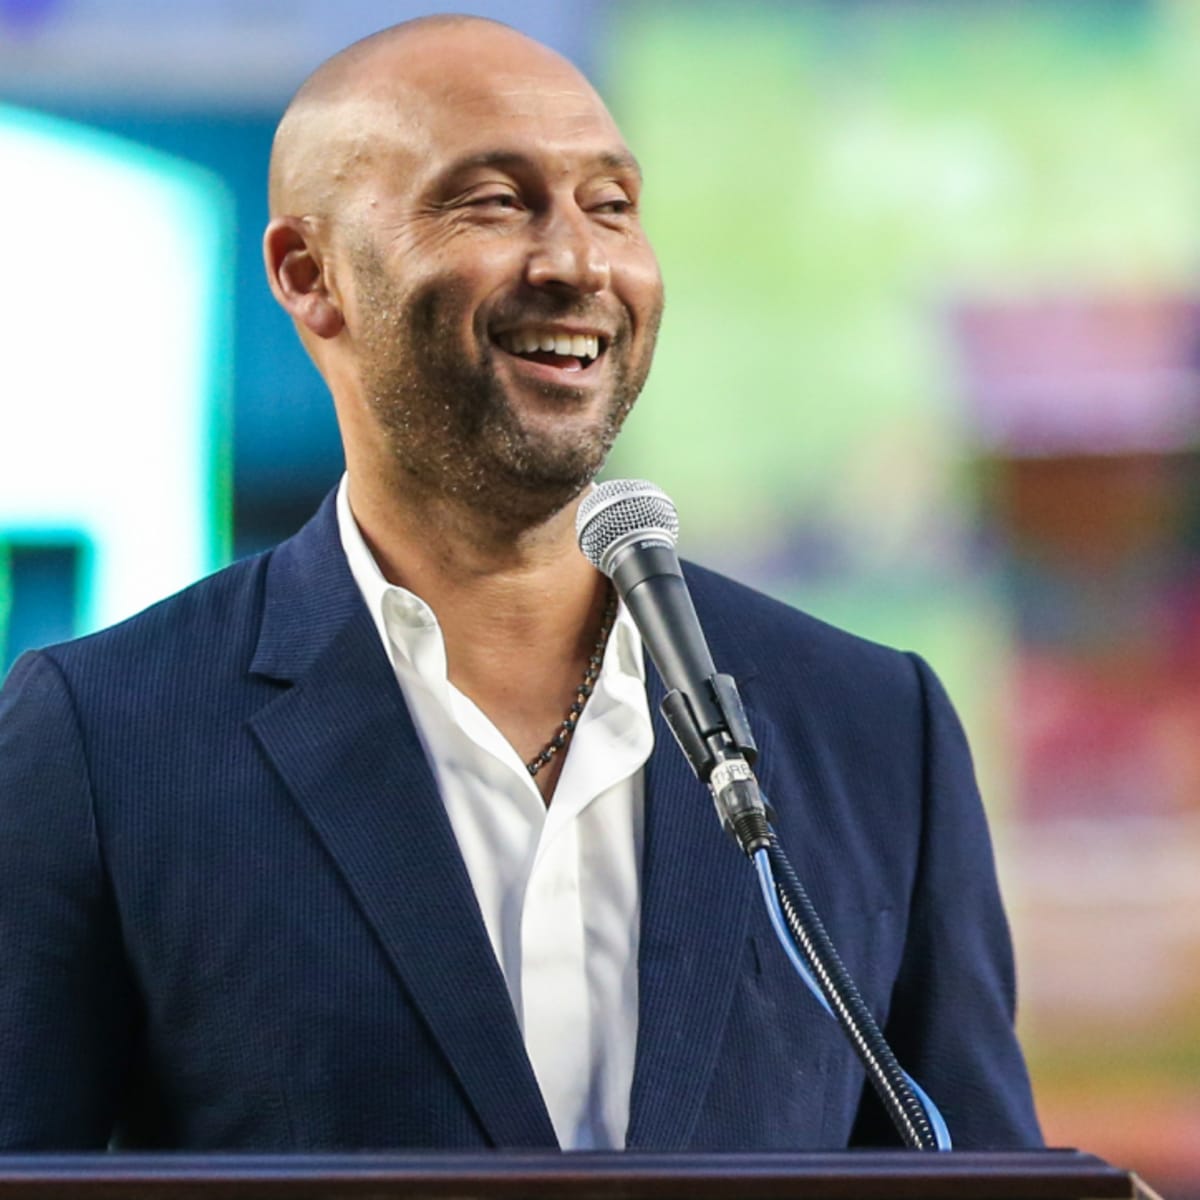 Derek Jeter at Yankees Old-Timers' Day with 1998 World Series champs